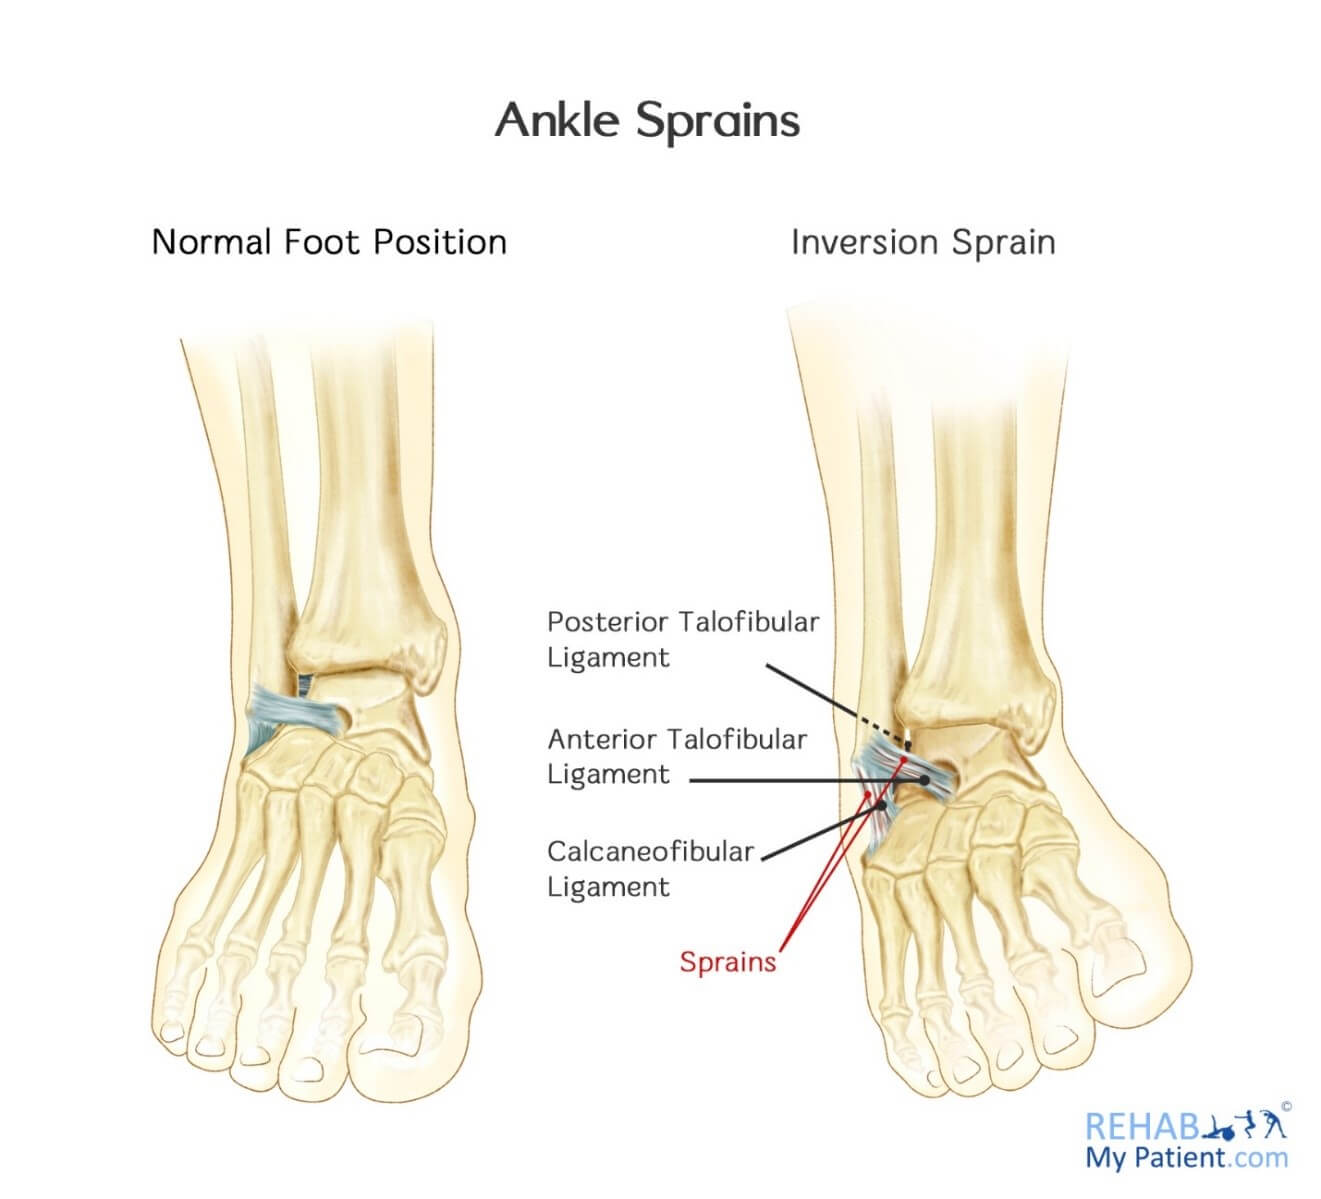 Clinical Practice Guidelines : Ankle Sprains - Emergency Department